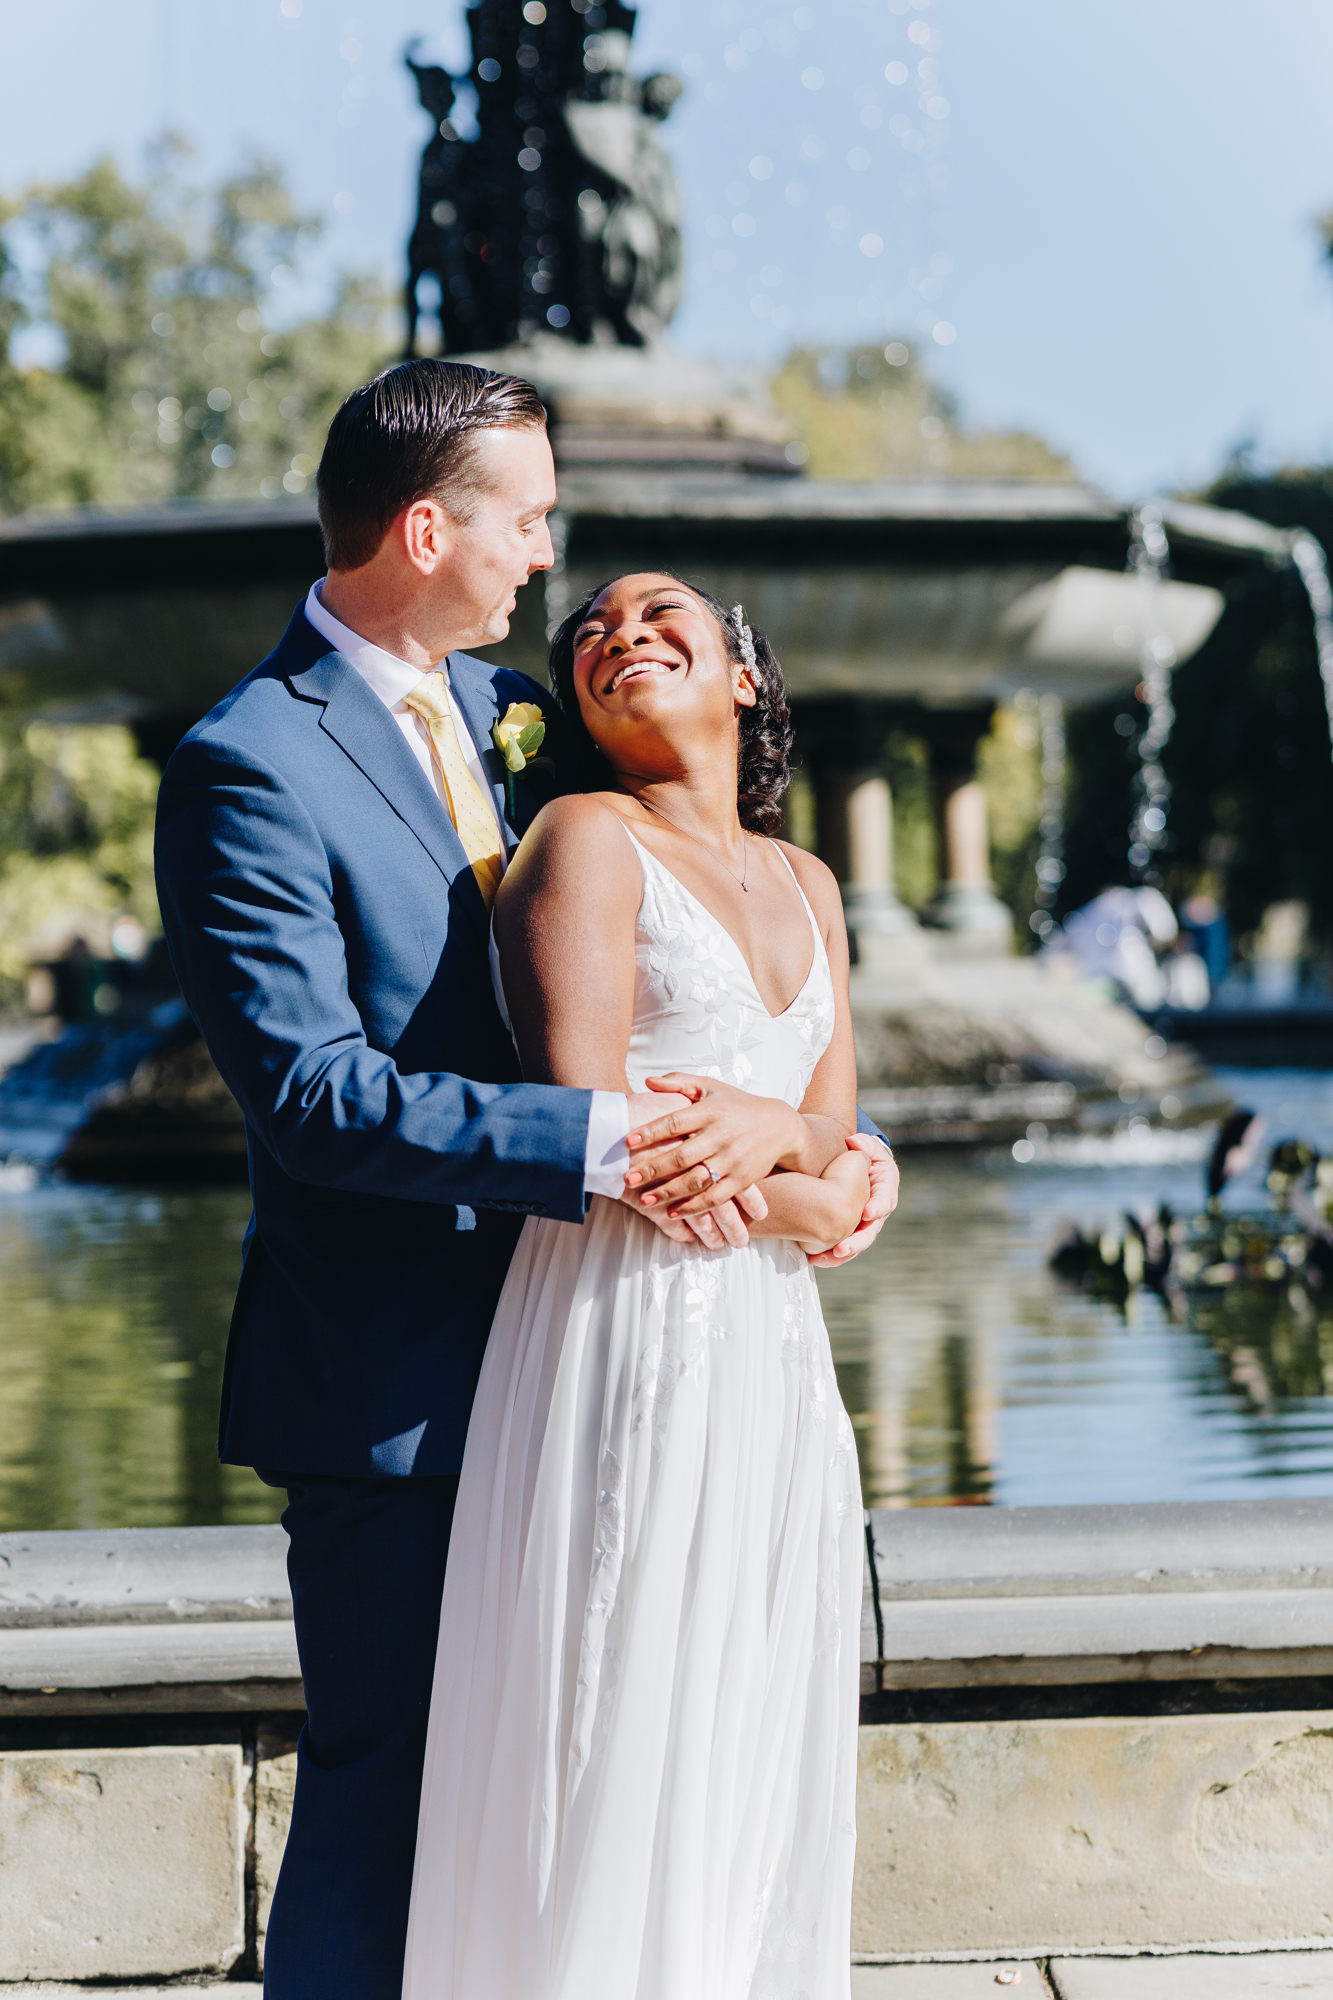 Intimate Central Park Elopement Photos in NYC